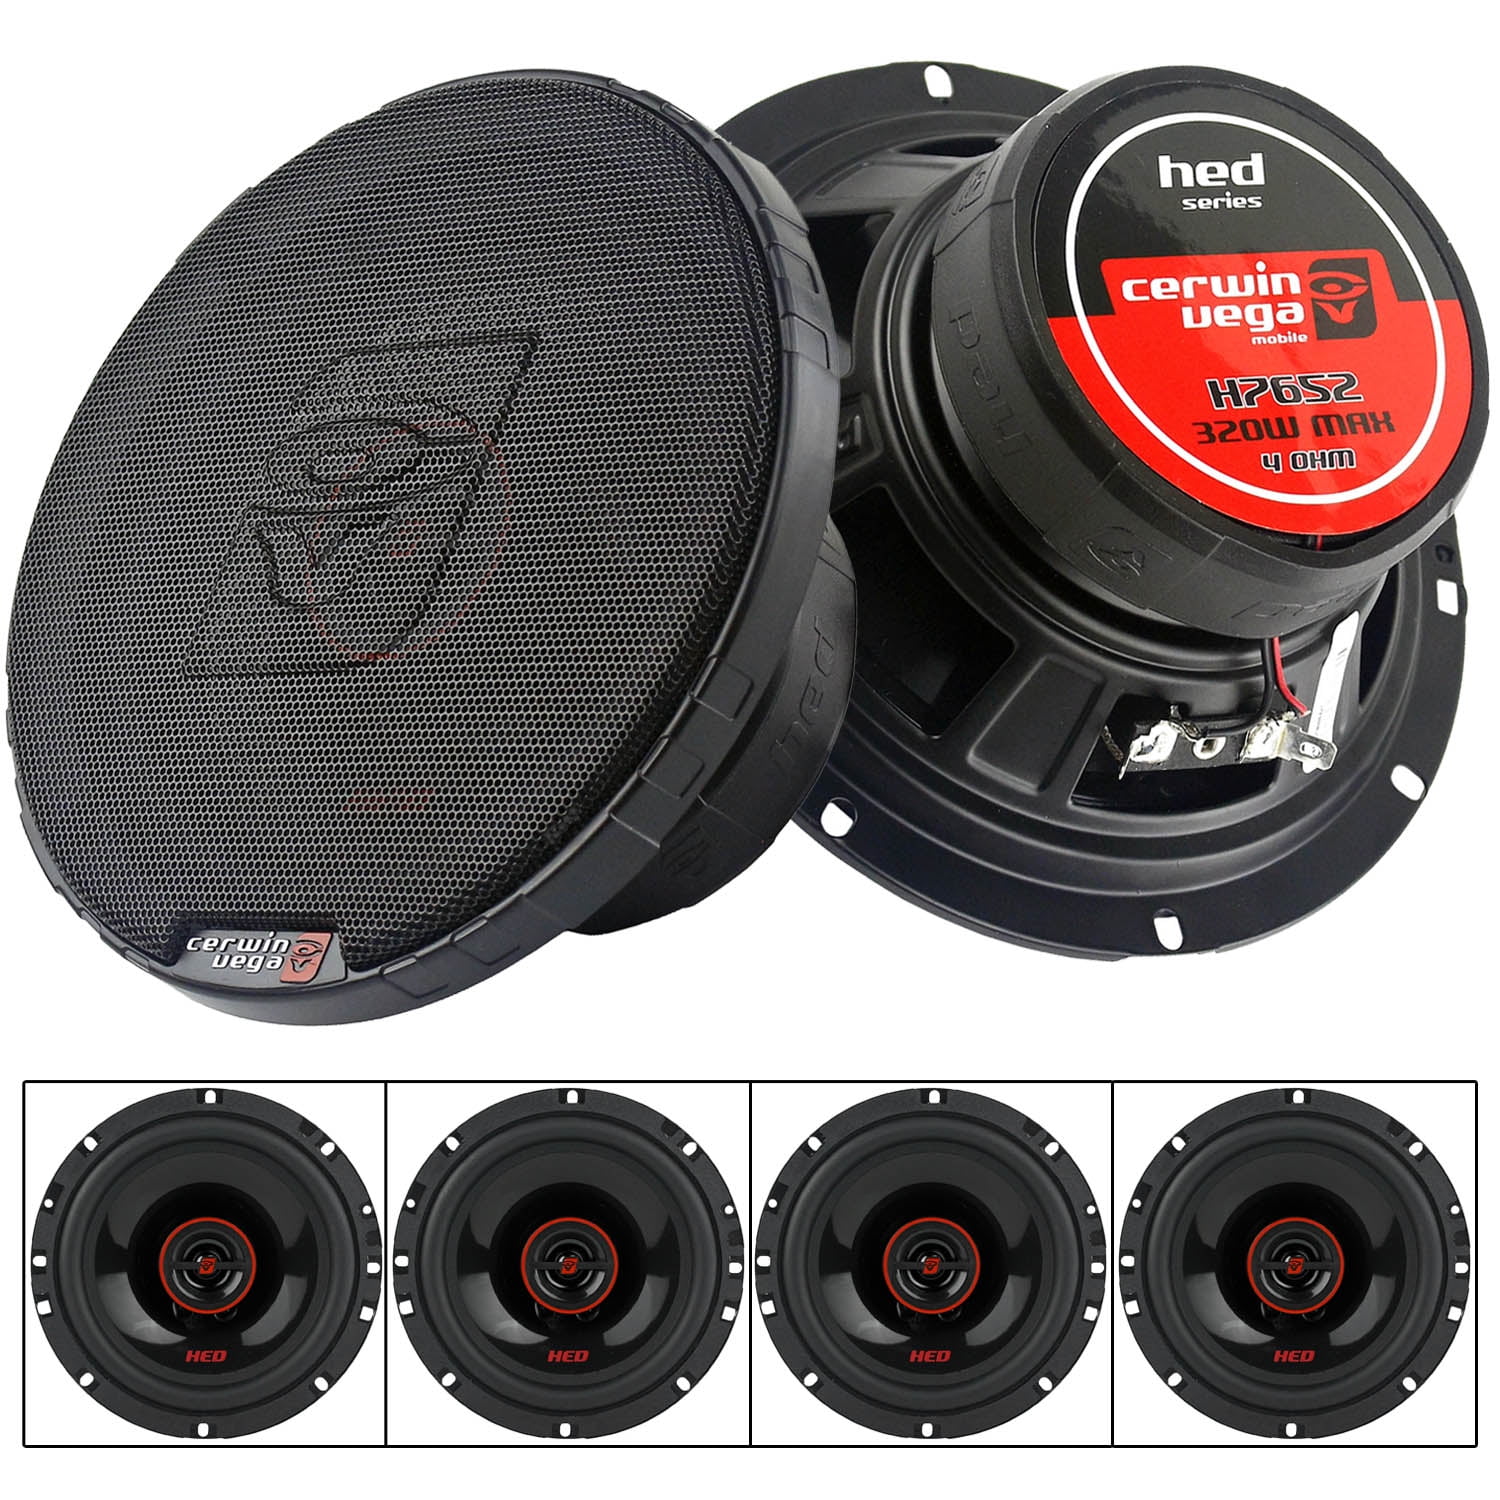 275W MAX NEW Cerwin Vega HED 4"X 6" 2-way coaxial speaker set 30W RMS H746 